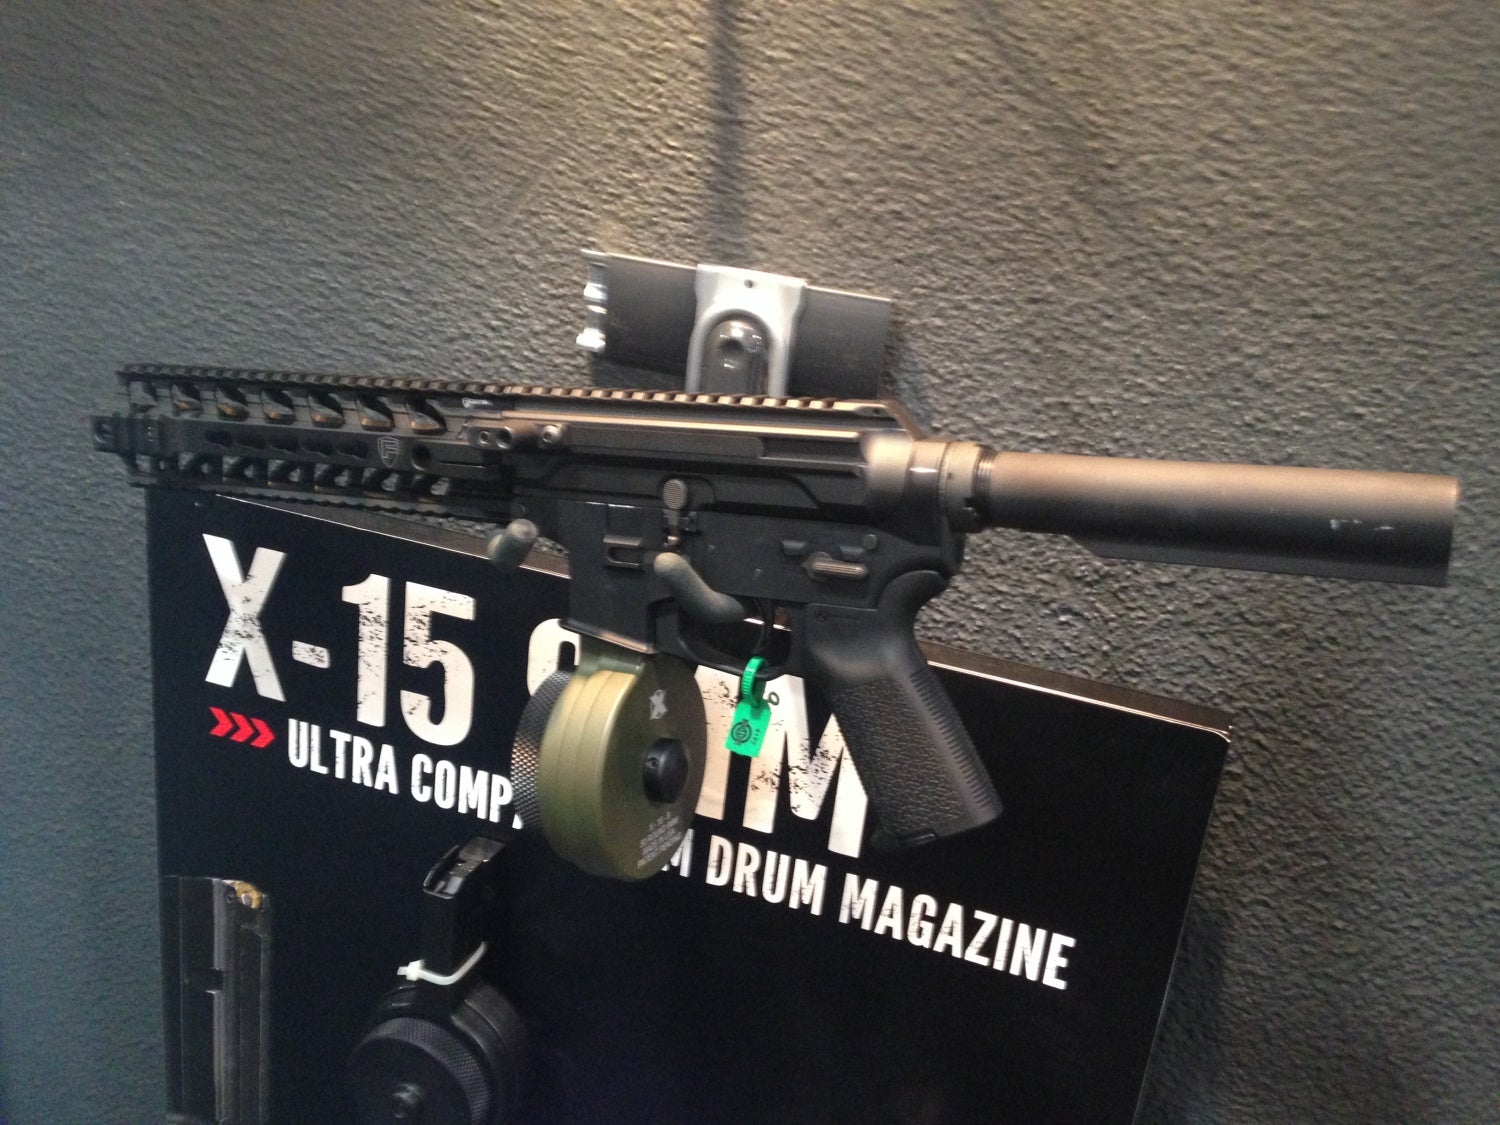 They are also going to make a 50 rd drum for 9mm ARs that use glock magazin...